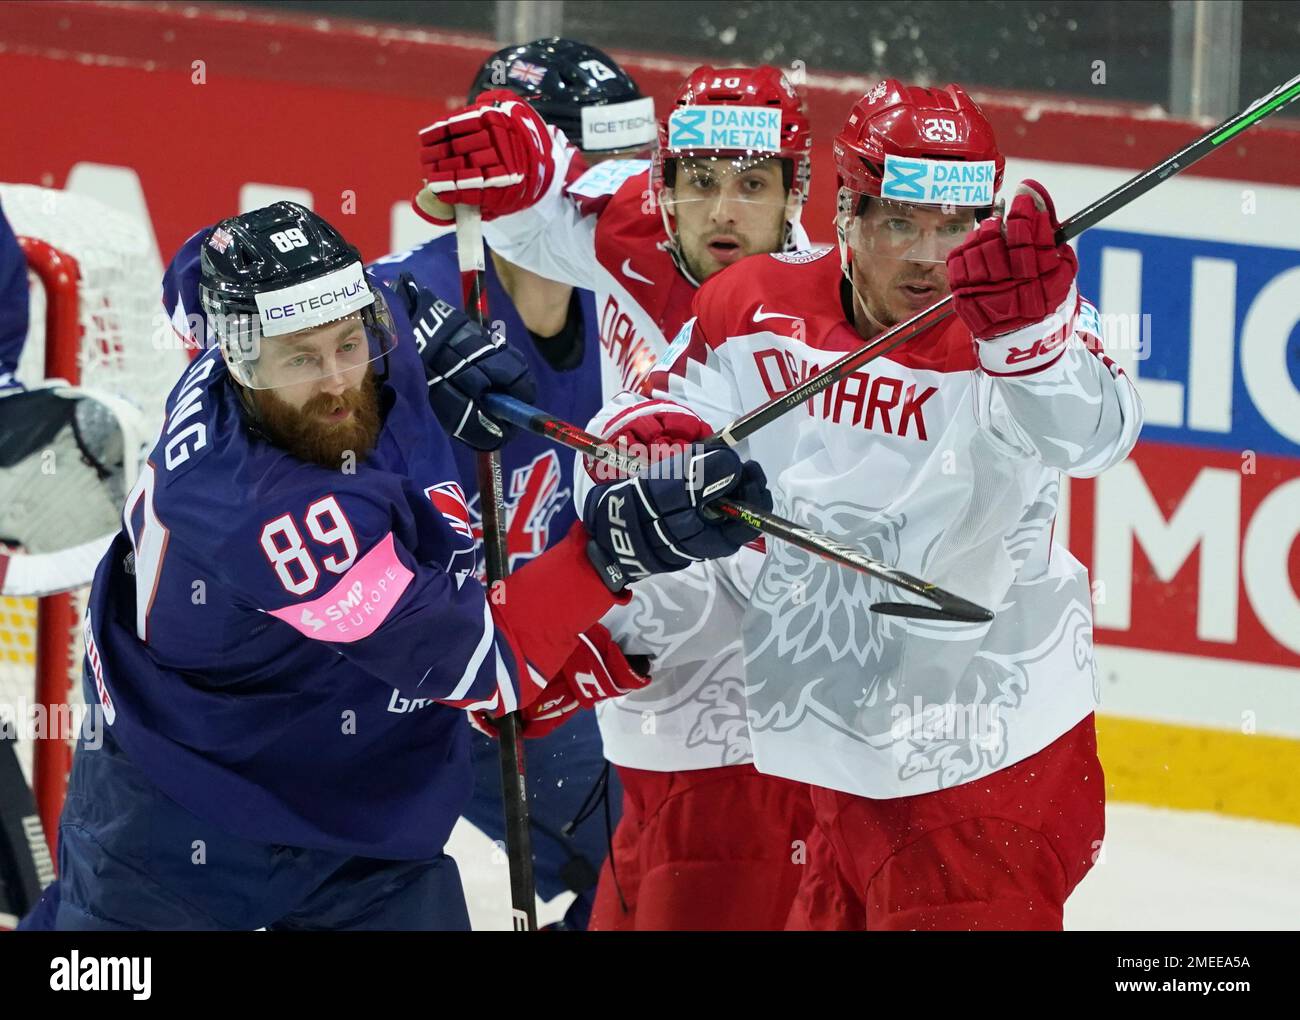 Riga, Olympic Sports Centre, Denmark. 28th May, 2021. vs Belarus (2021 IIHF  Ice Hockey World Championship), #13 Mikhail Stefanovich (Belarus) scores  and celebrates with #17 Yegor Sharangovich (Belarus) and #12 Alexei Protas (